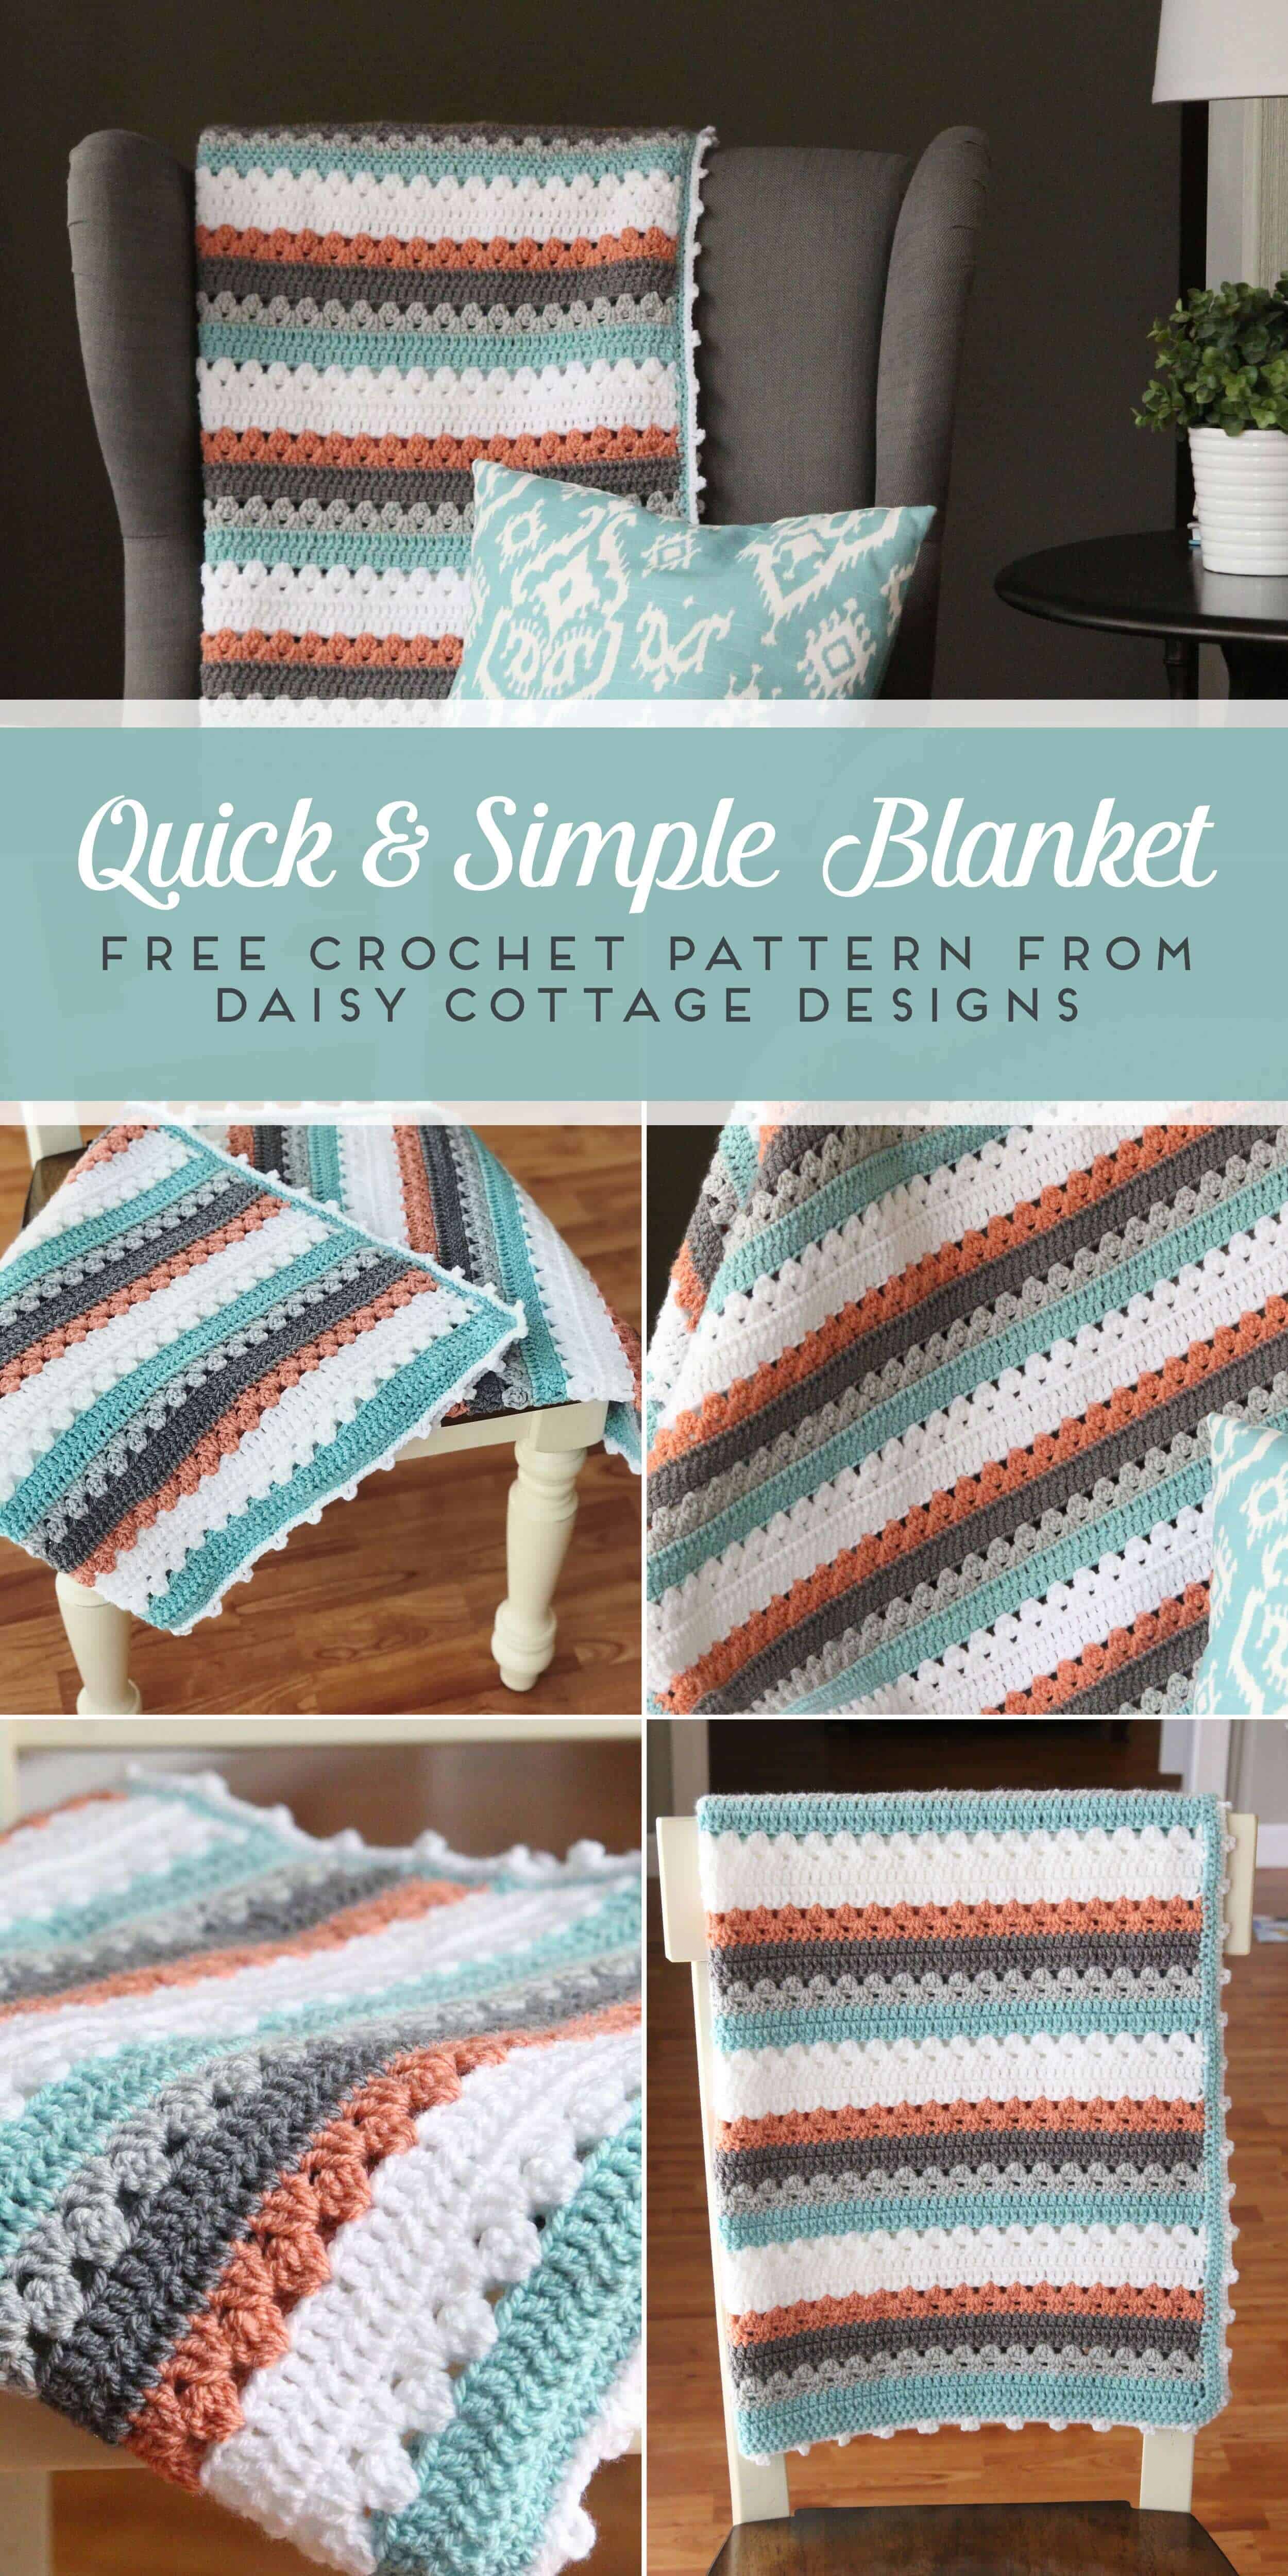 Use this blanket crochet pattern from Daisy Cottage Designs to create a beautiful afghan in any color way. | free crochet pattern, easy crochet pattern, free blanket crochet pattern, granny stripe crochet pattern